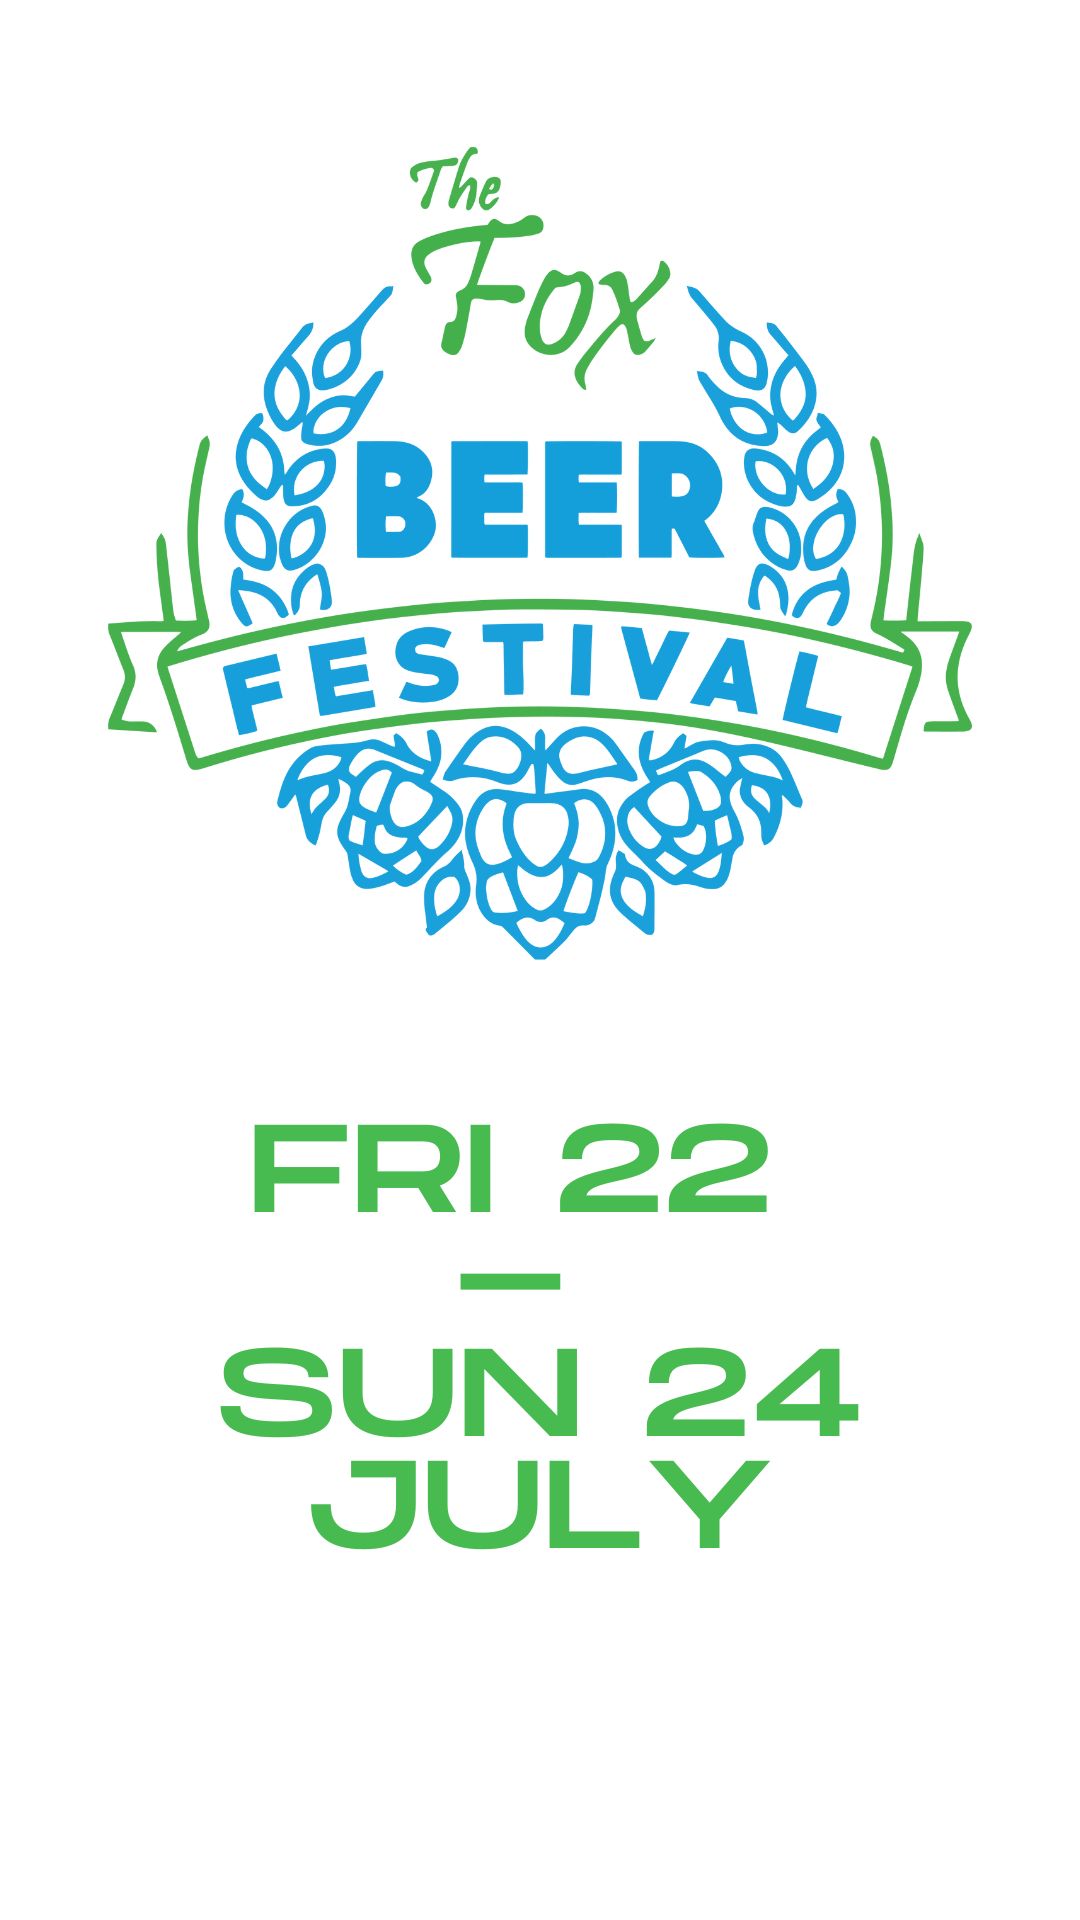 The Fox Beer Festival - 22nd-24th July